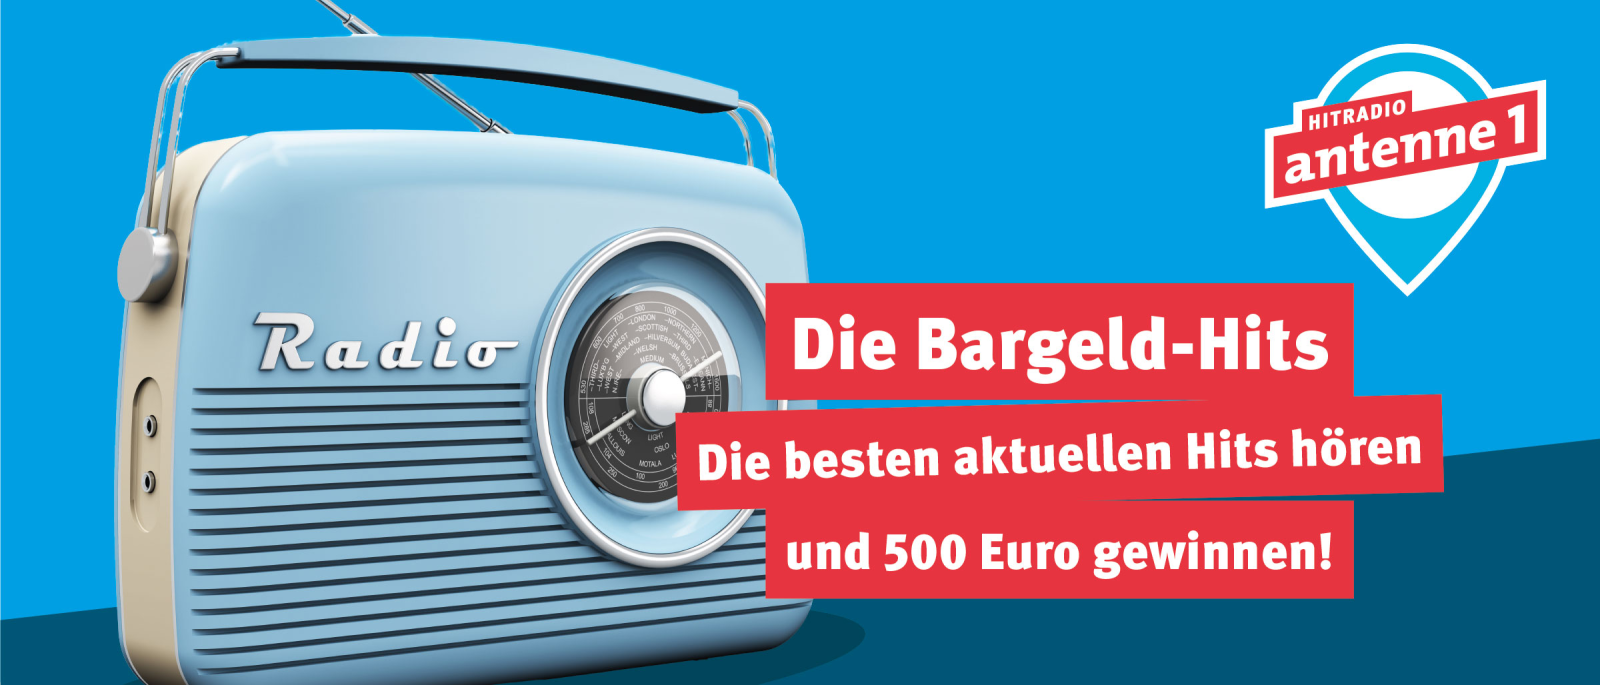 antenne 1-Bargeld-Hits